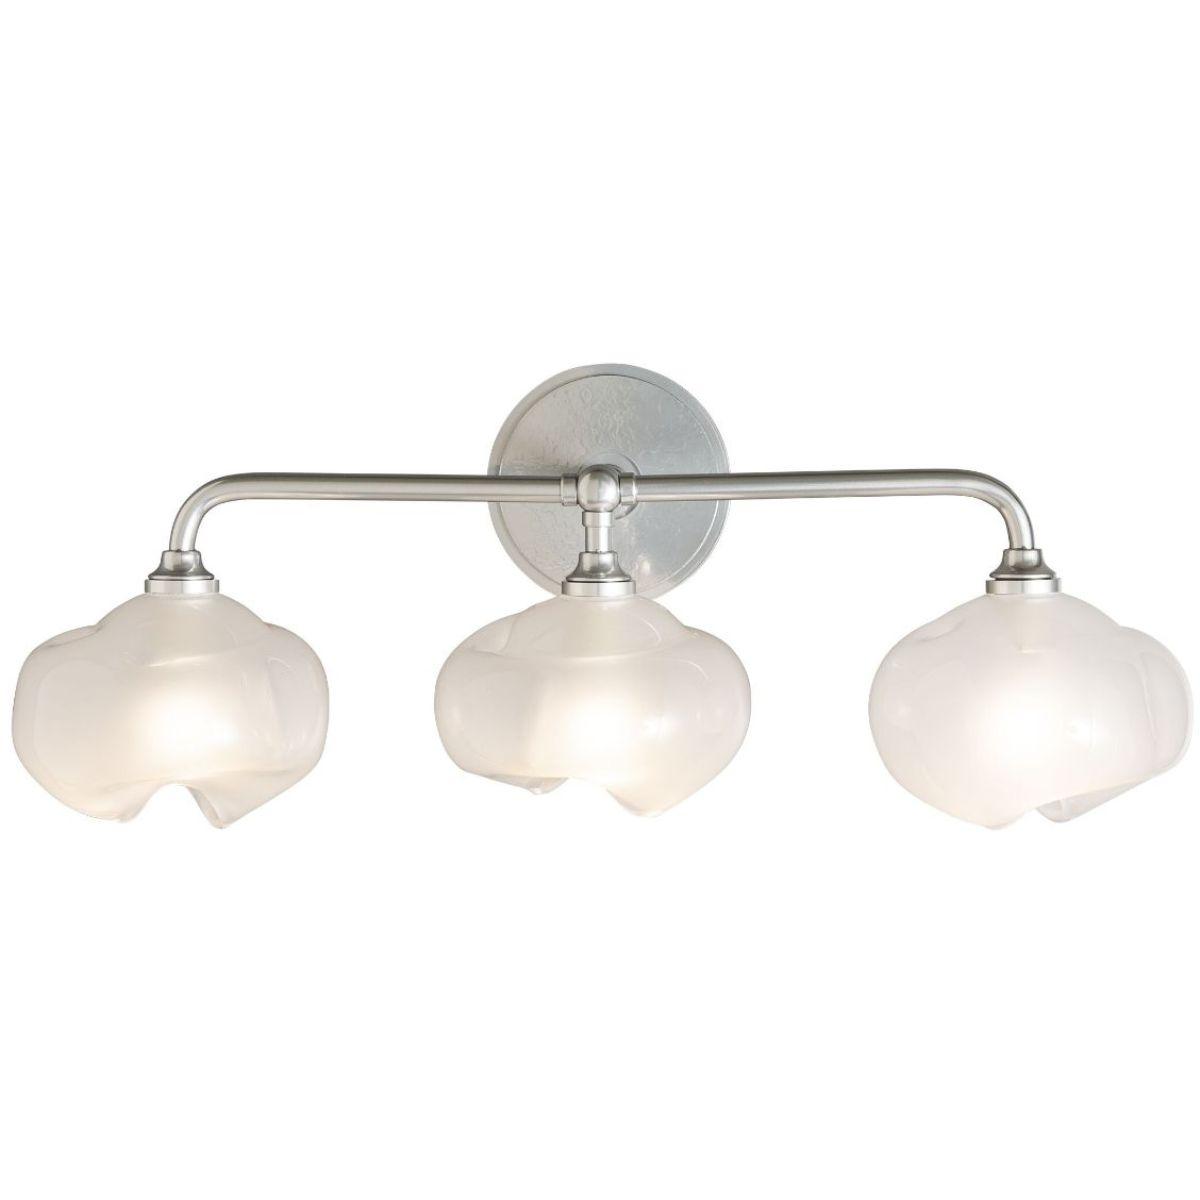 Ume 22 in. 3 Lights Vanity Light Clear Glass